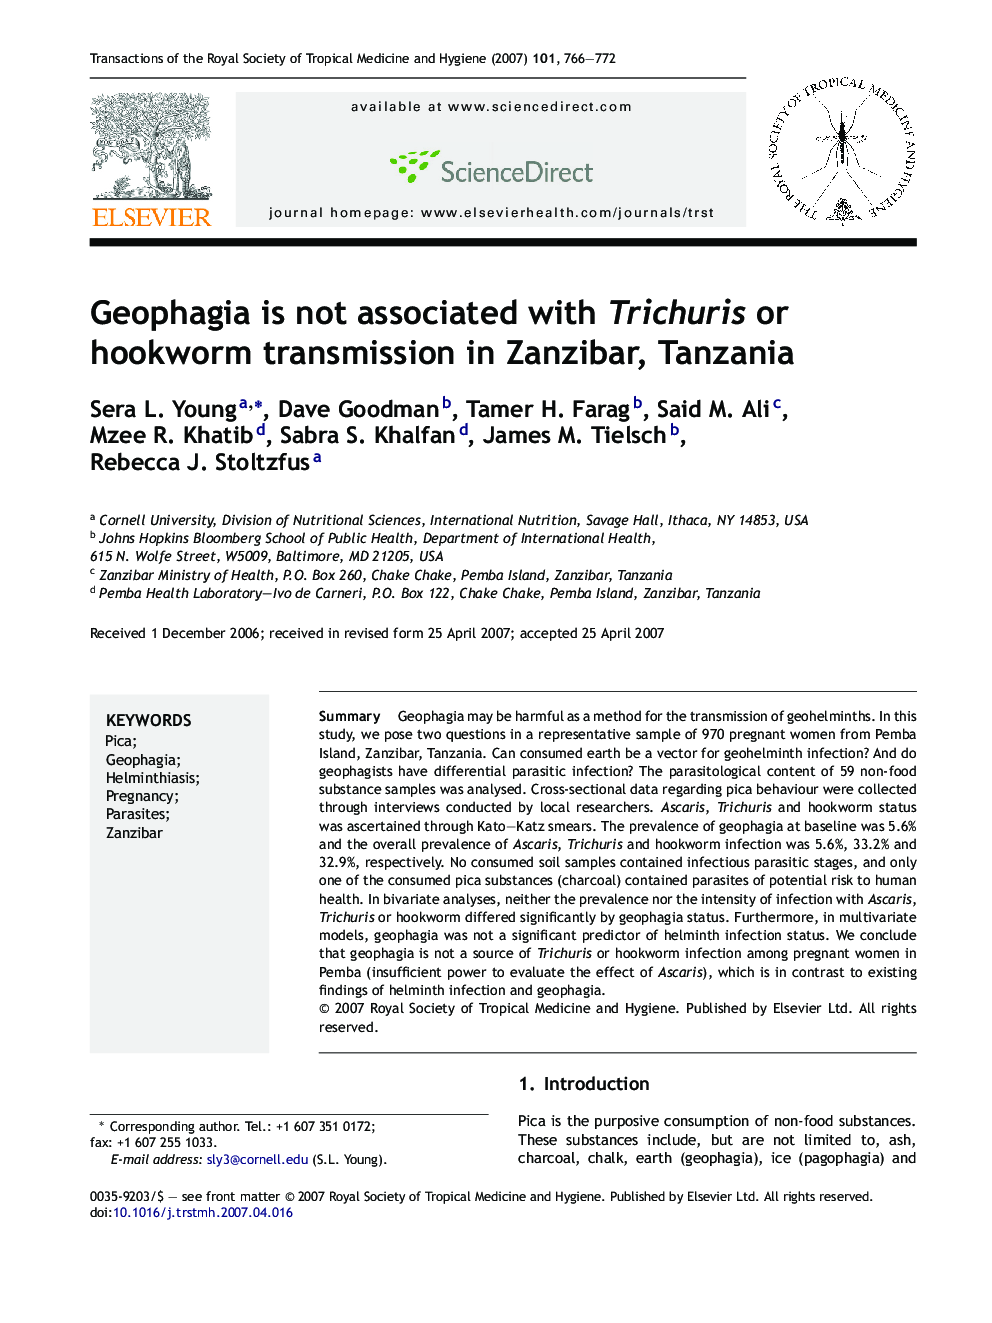 Geophagia is not associated with Trichuris or hookworm transmission in Zanzibar, Tanzania